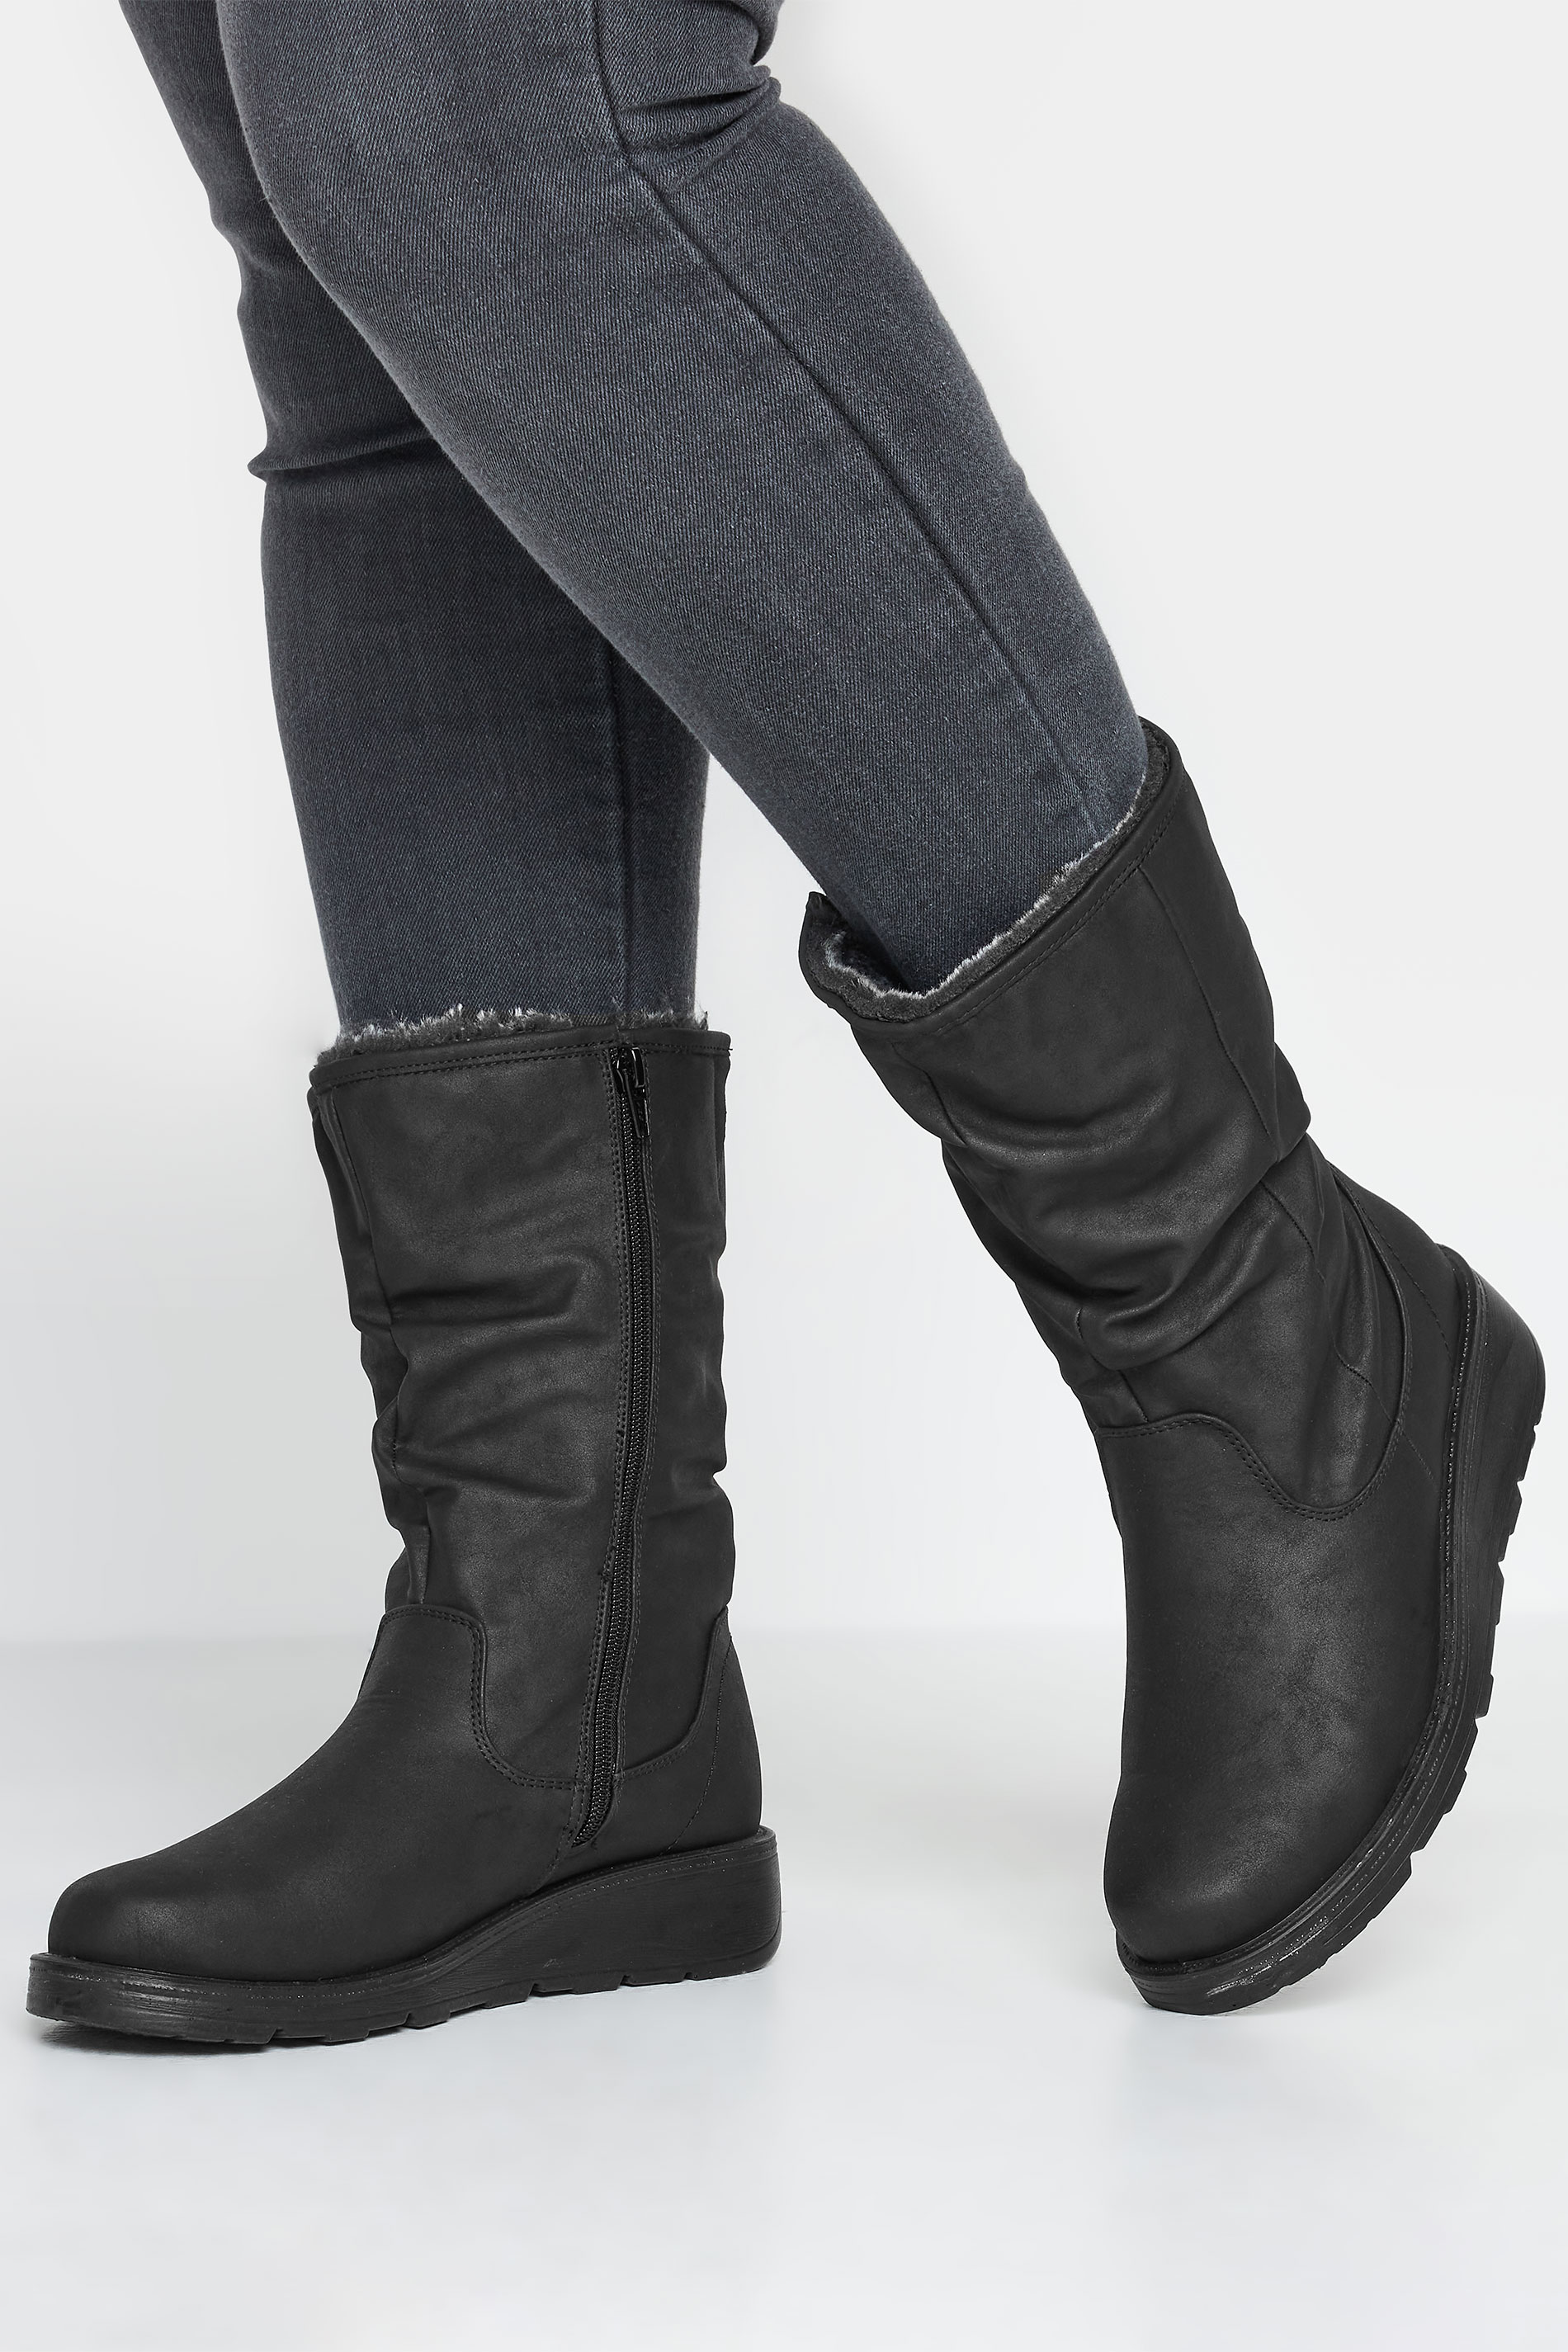 Black Fur Lined Calf Boots In Wide E Fit & Wide EEE Fit | Yours Clothing 1